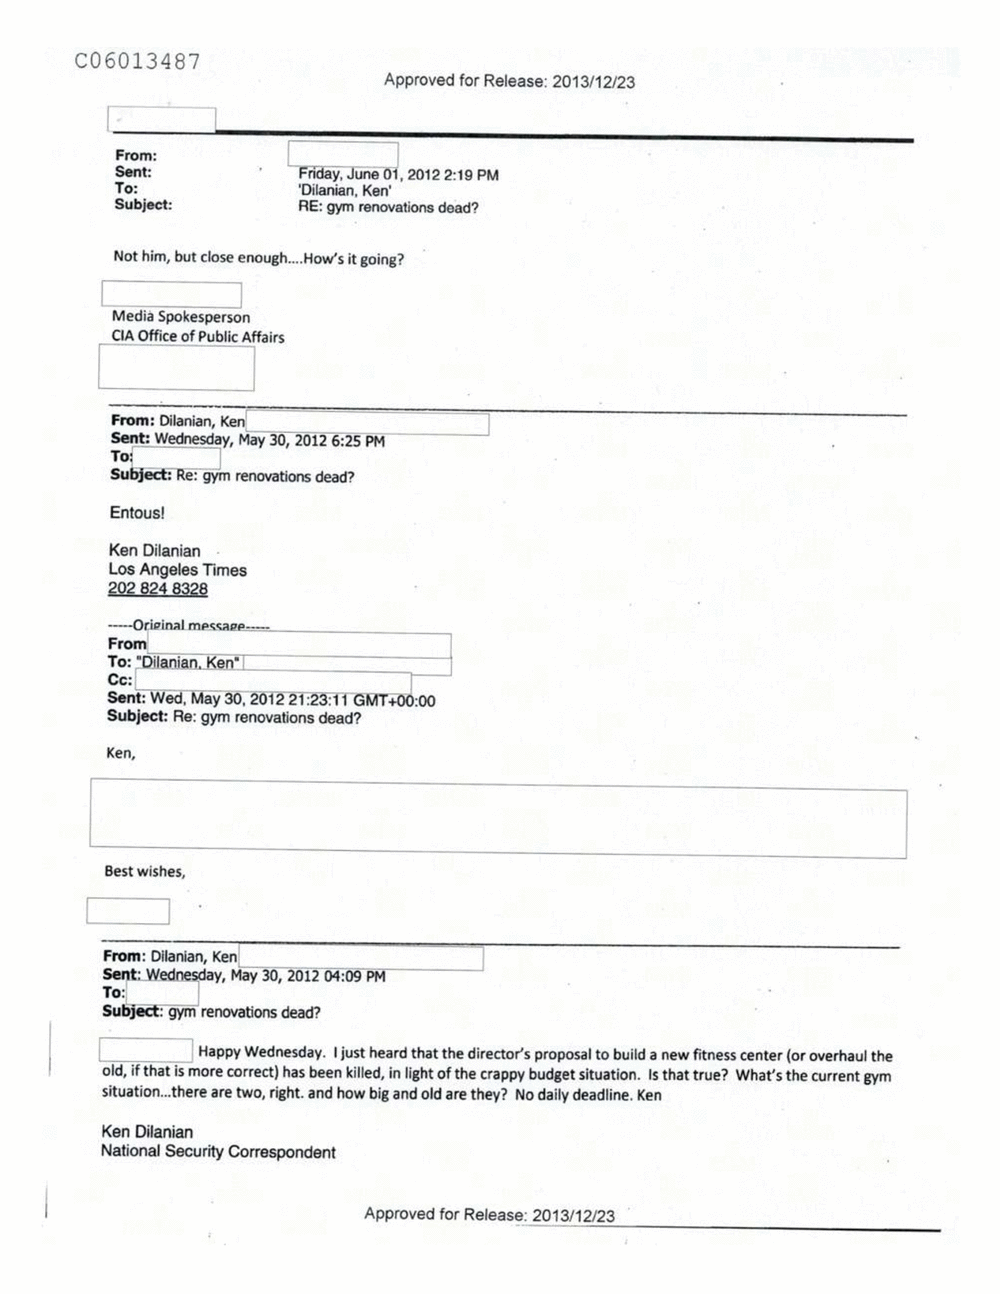 Page 335 from Email Correspondence Between Reporters and CIA Flacks